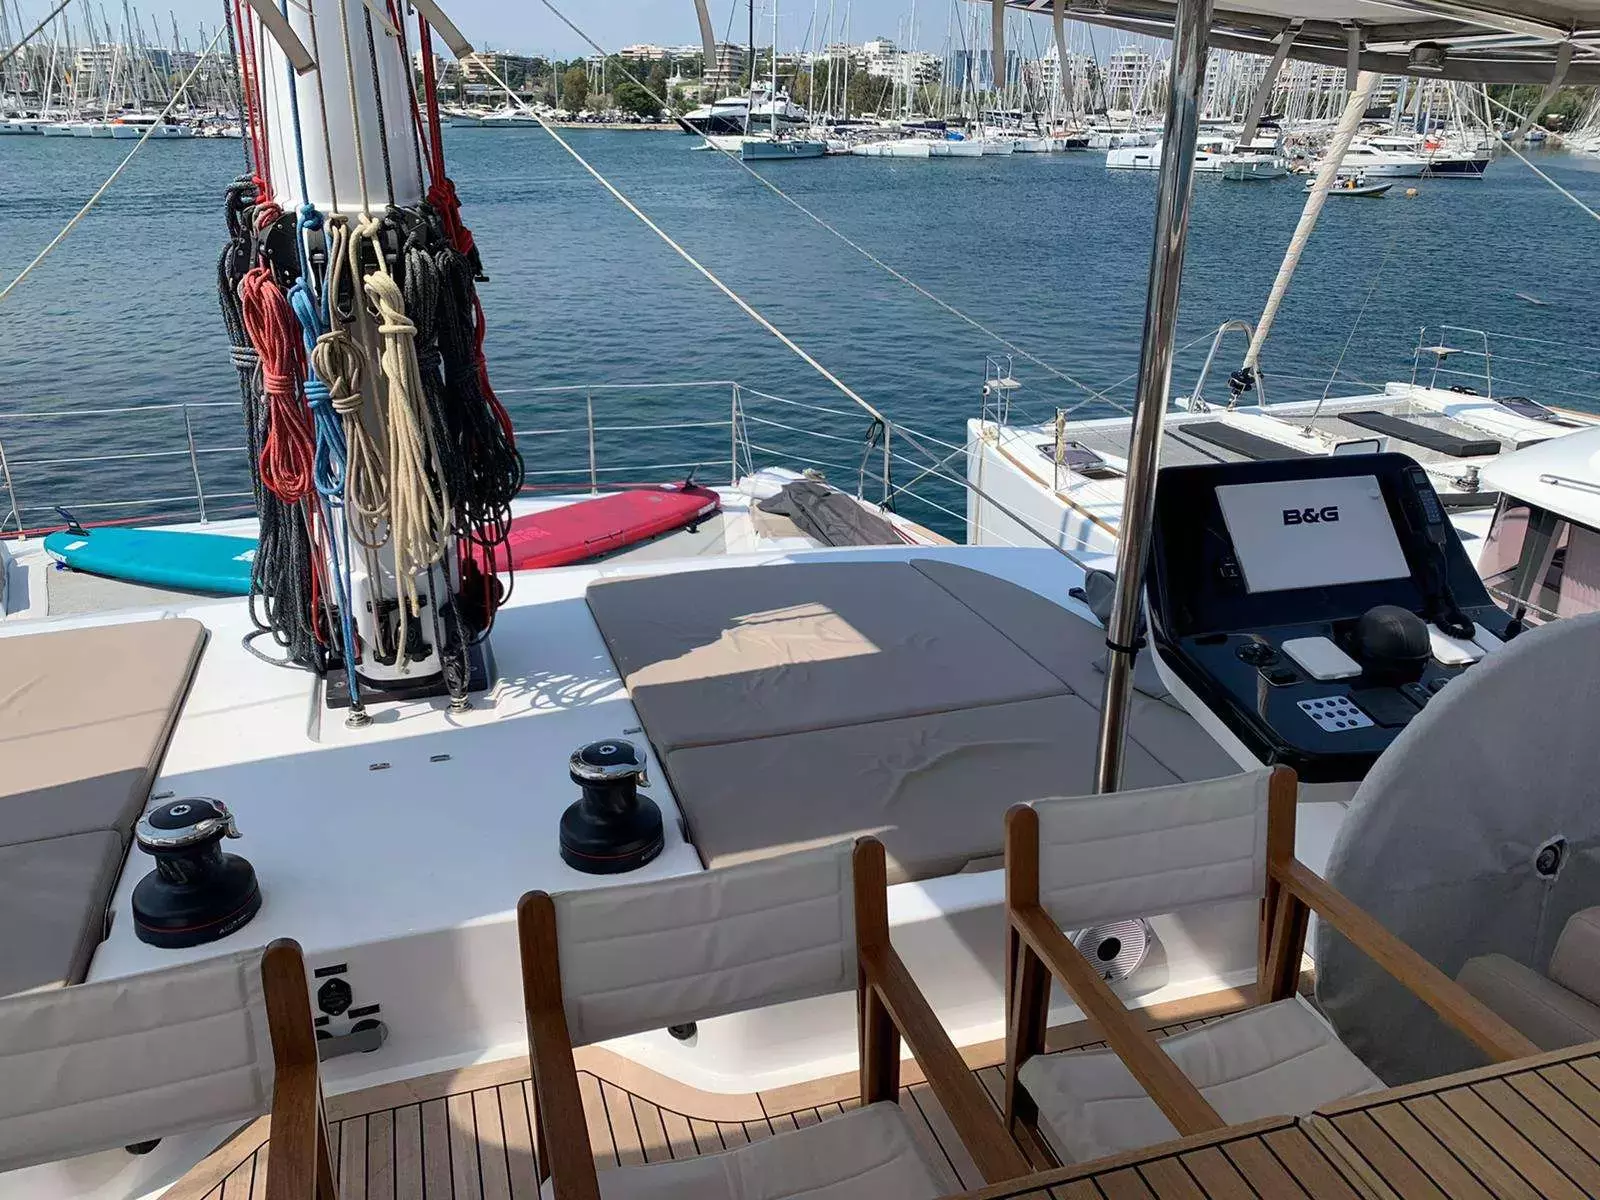 Adara by Sunreef Yachts - Top rates for a Rental of a private Sailing Catamaran in Greece